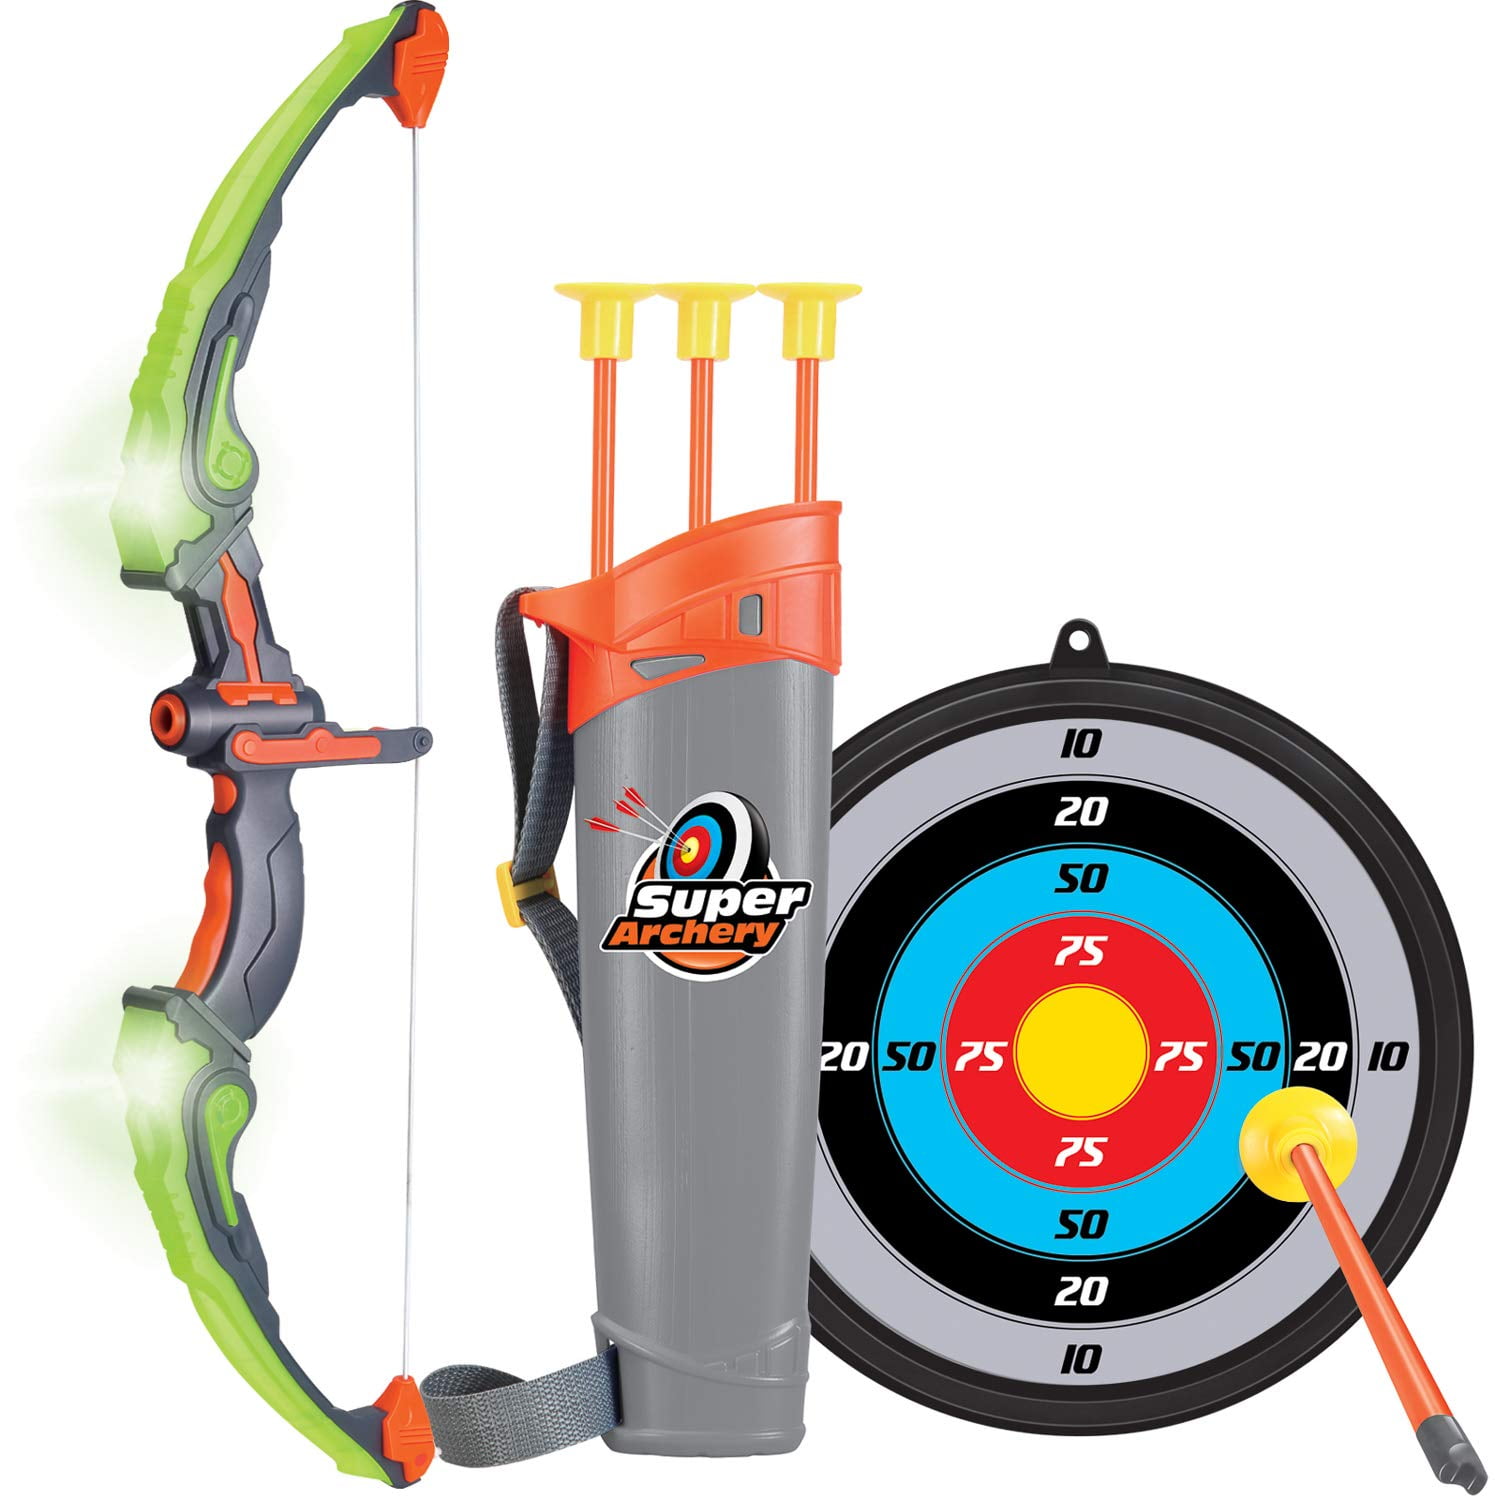 Click N' Play Light Up Toy Bow and Arrow Archery Set | Outside Kids Toy for  Bow and Arrow Hunting Play | Including Bow, 3 Suction Cups Kids Arrows,  Target, and Quiver - Walmart.com